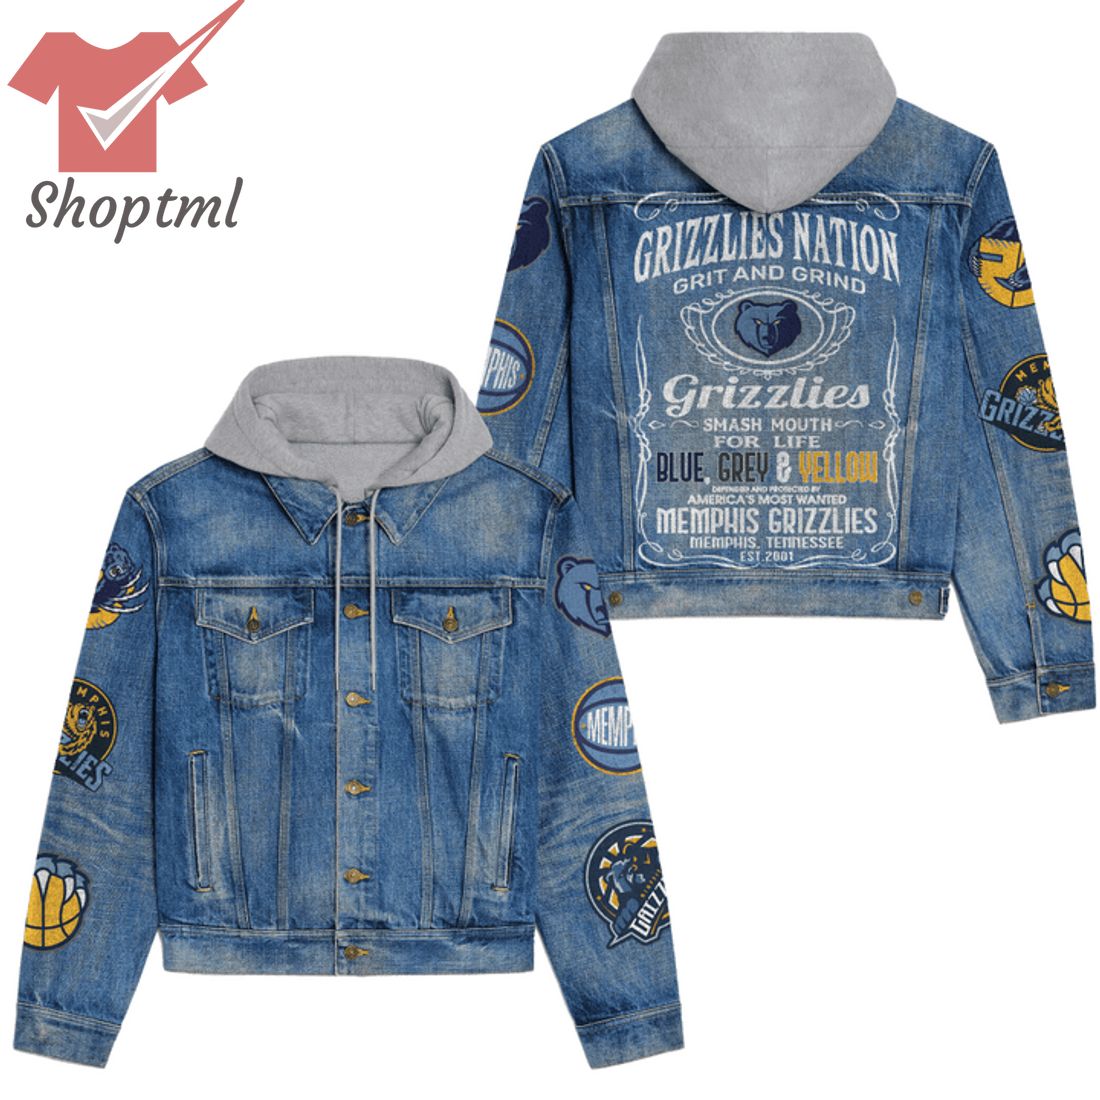 Memphis Grizzlies Nation Grit And Grind Hooded Denim Jacket